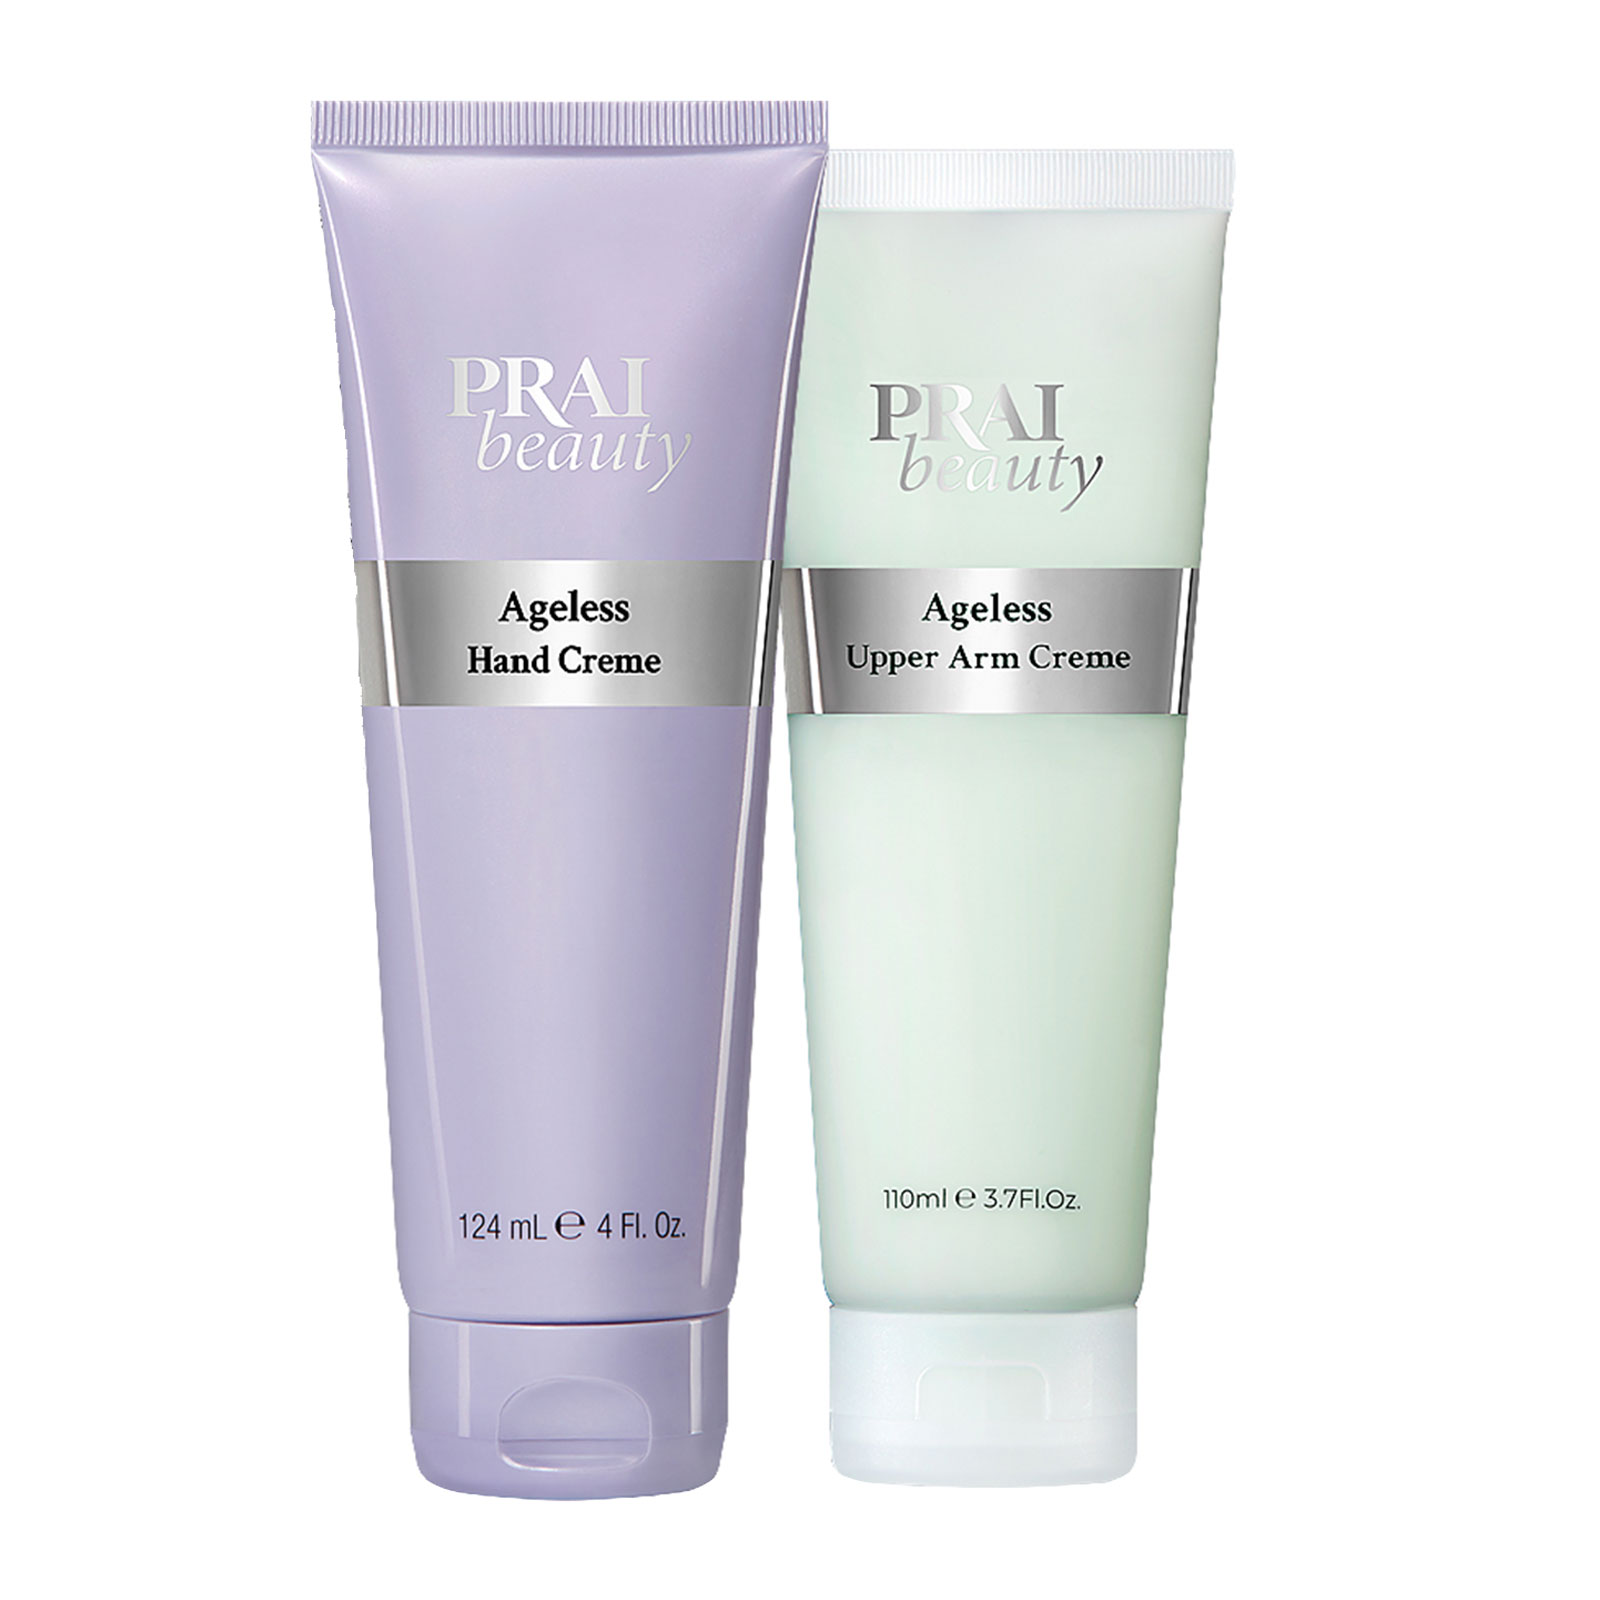 Prai Beauty Ageless Hand And Upper Arm Creme Duo